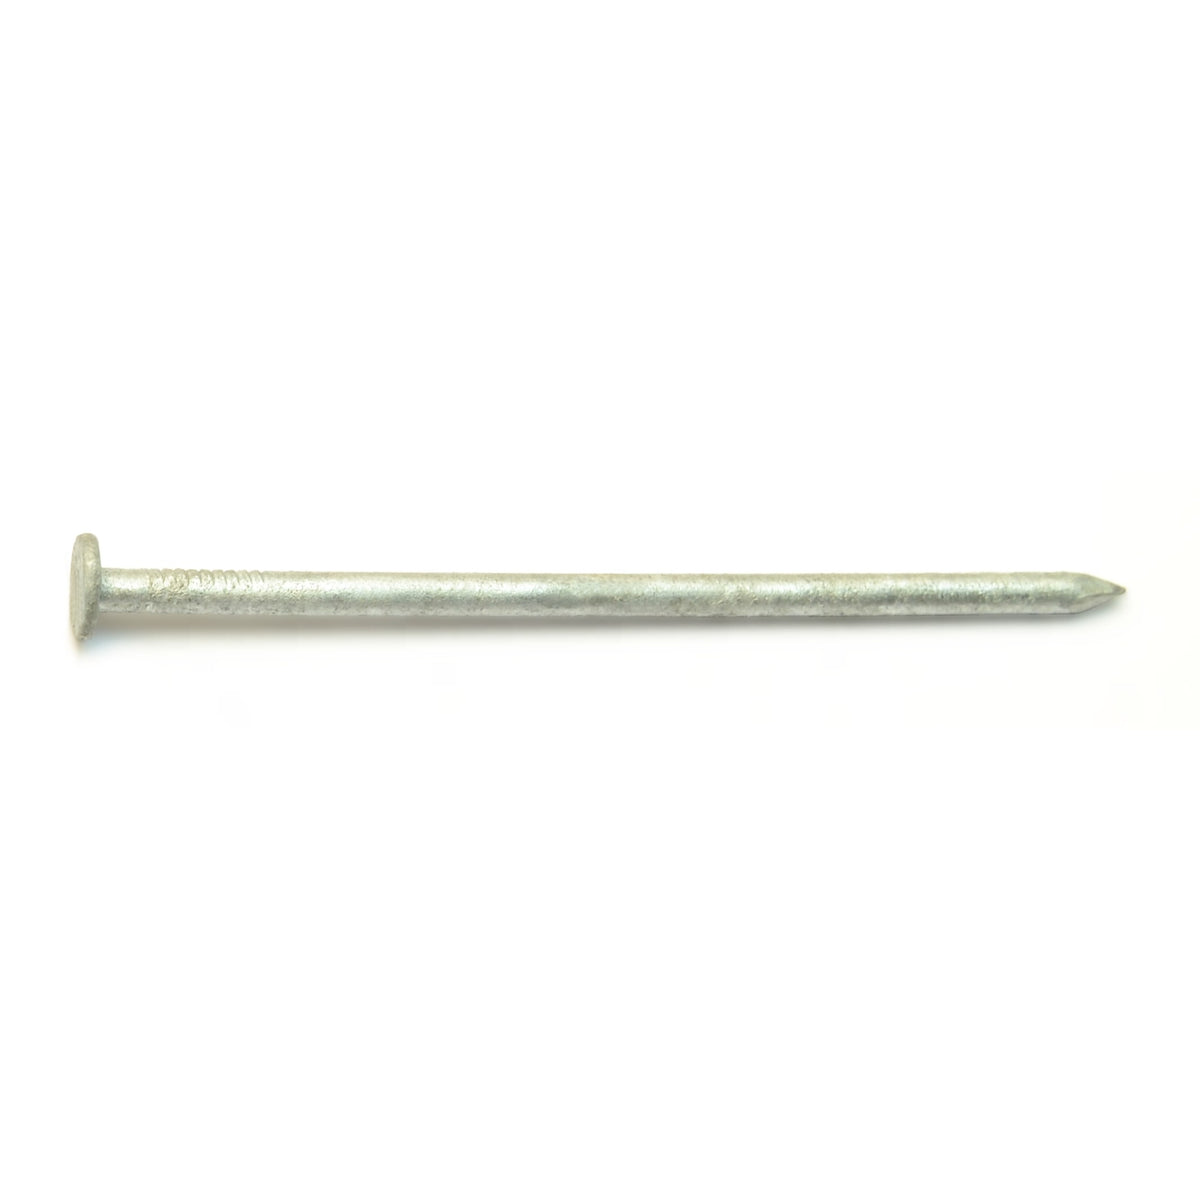 3-1/2 Inch Bright Common Nail (16D) 45 pounds ~2085 Nails. Good for general  construction projects